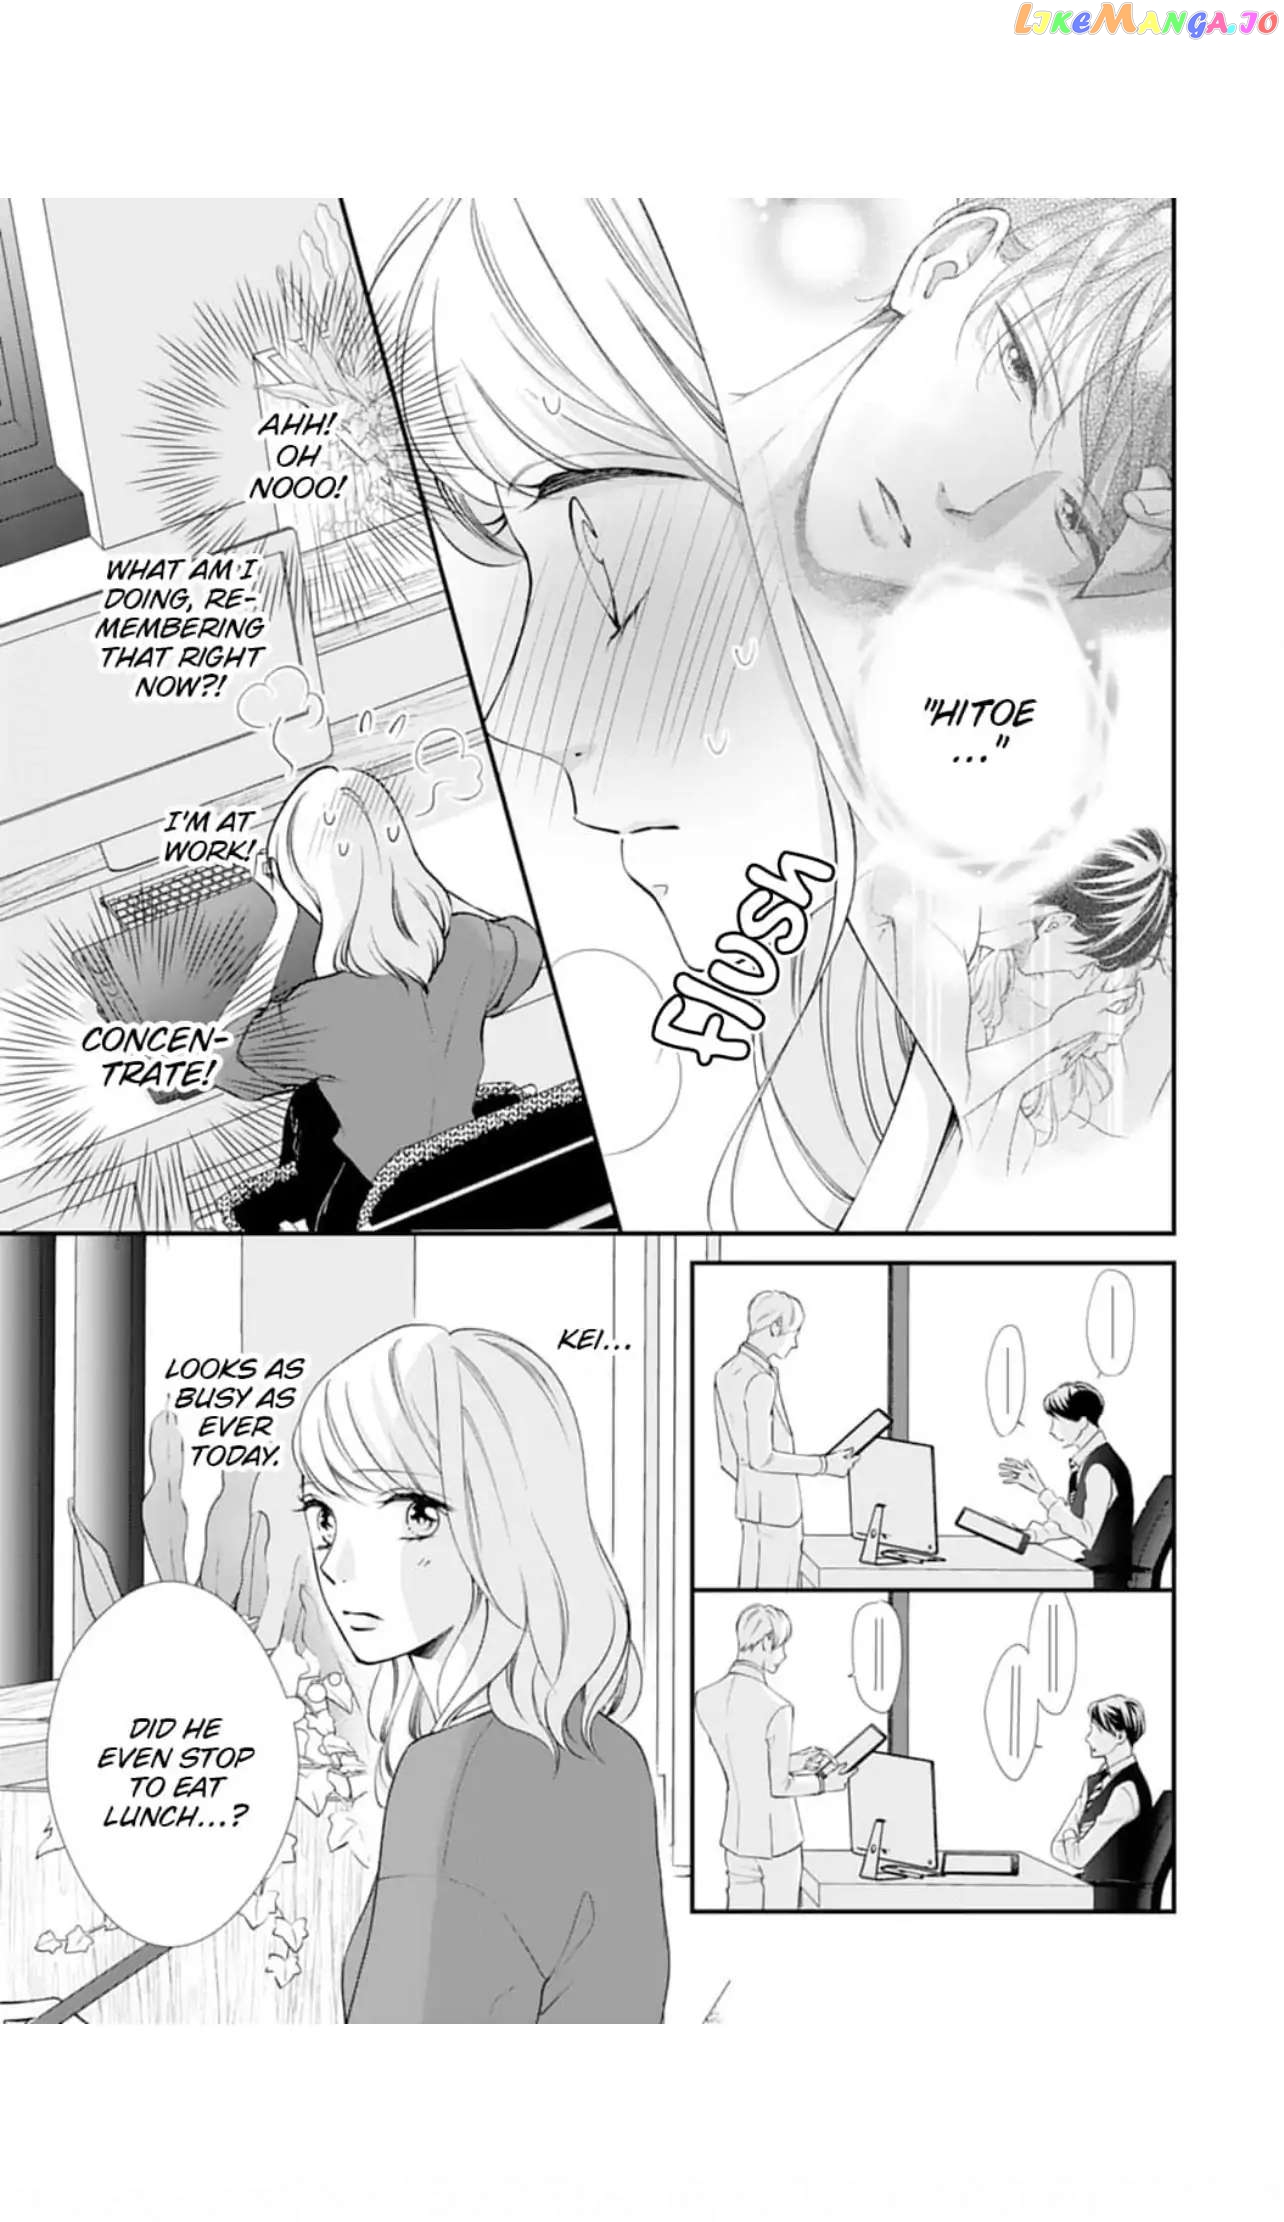 Nine Months Carrying Our Love: Our Last Night Together Was Only the Beginning Chapter 2 - page 18